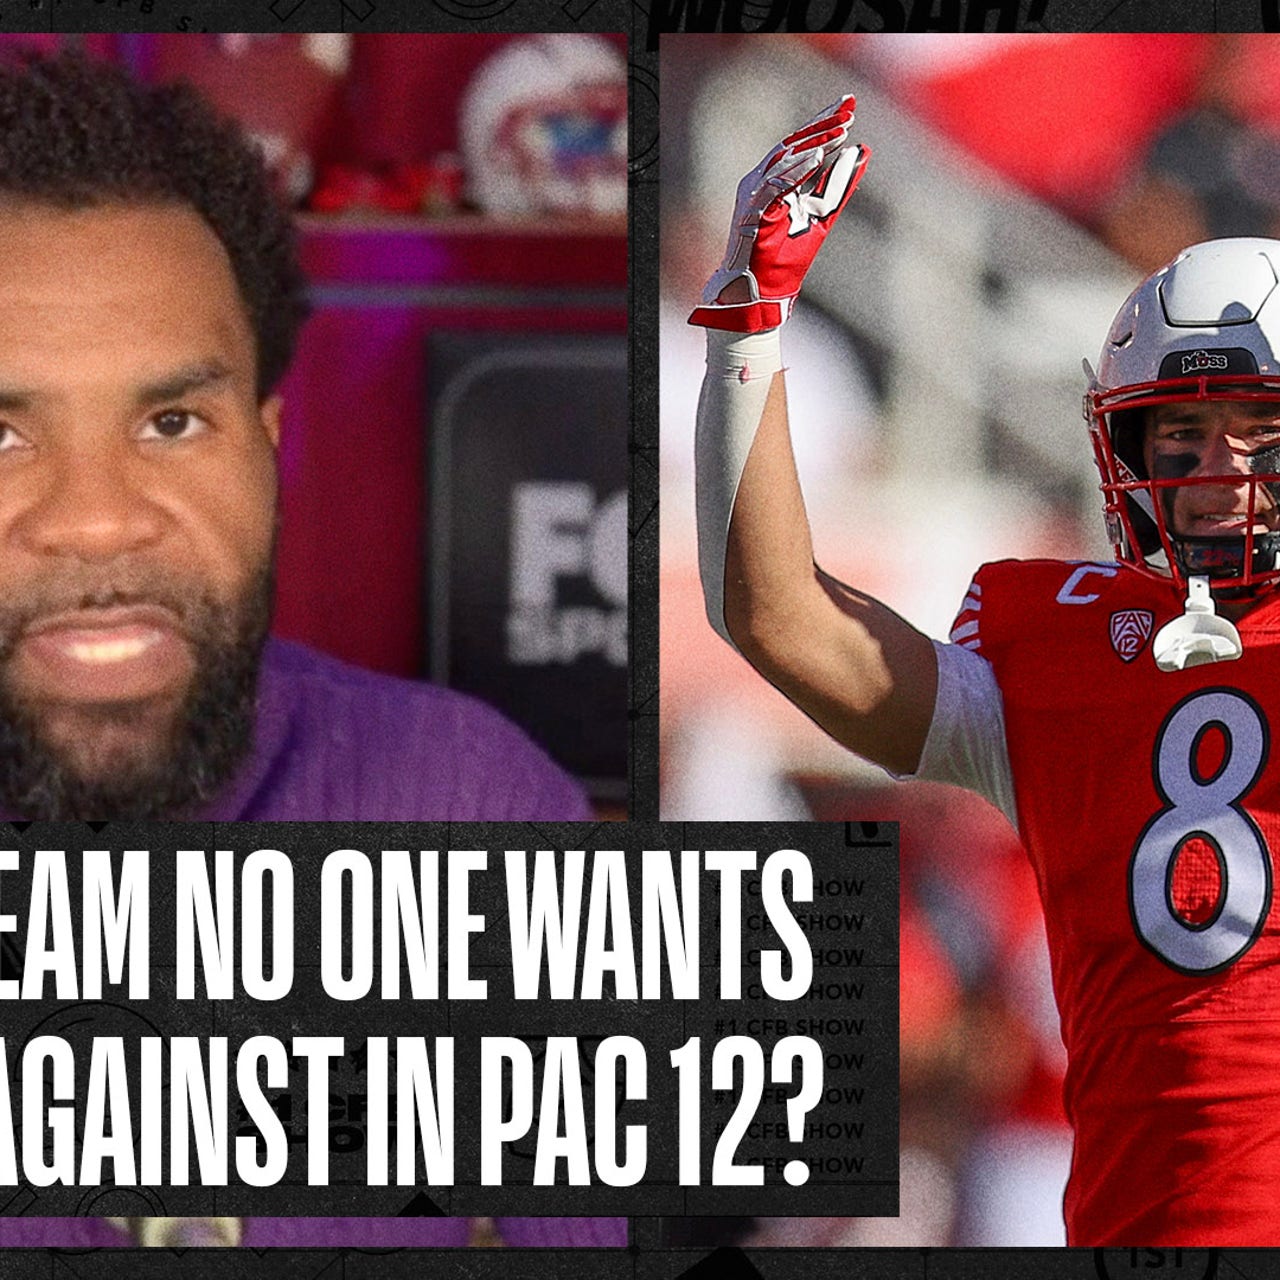 Is Utah becoming a team NO ONE wants to play against in the PAC-12? No